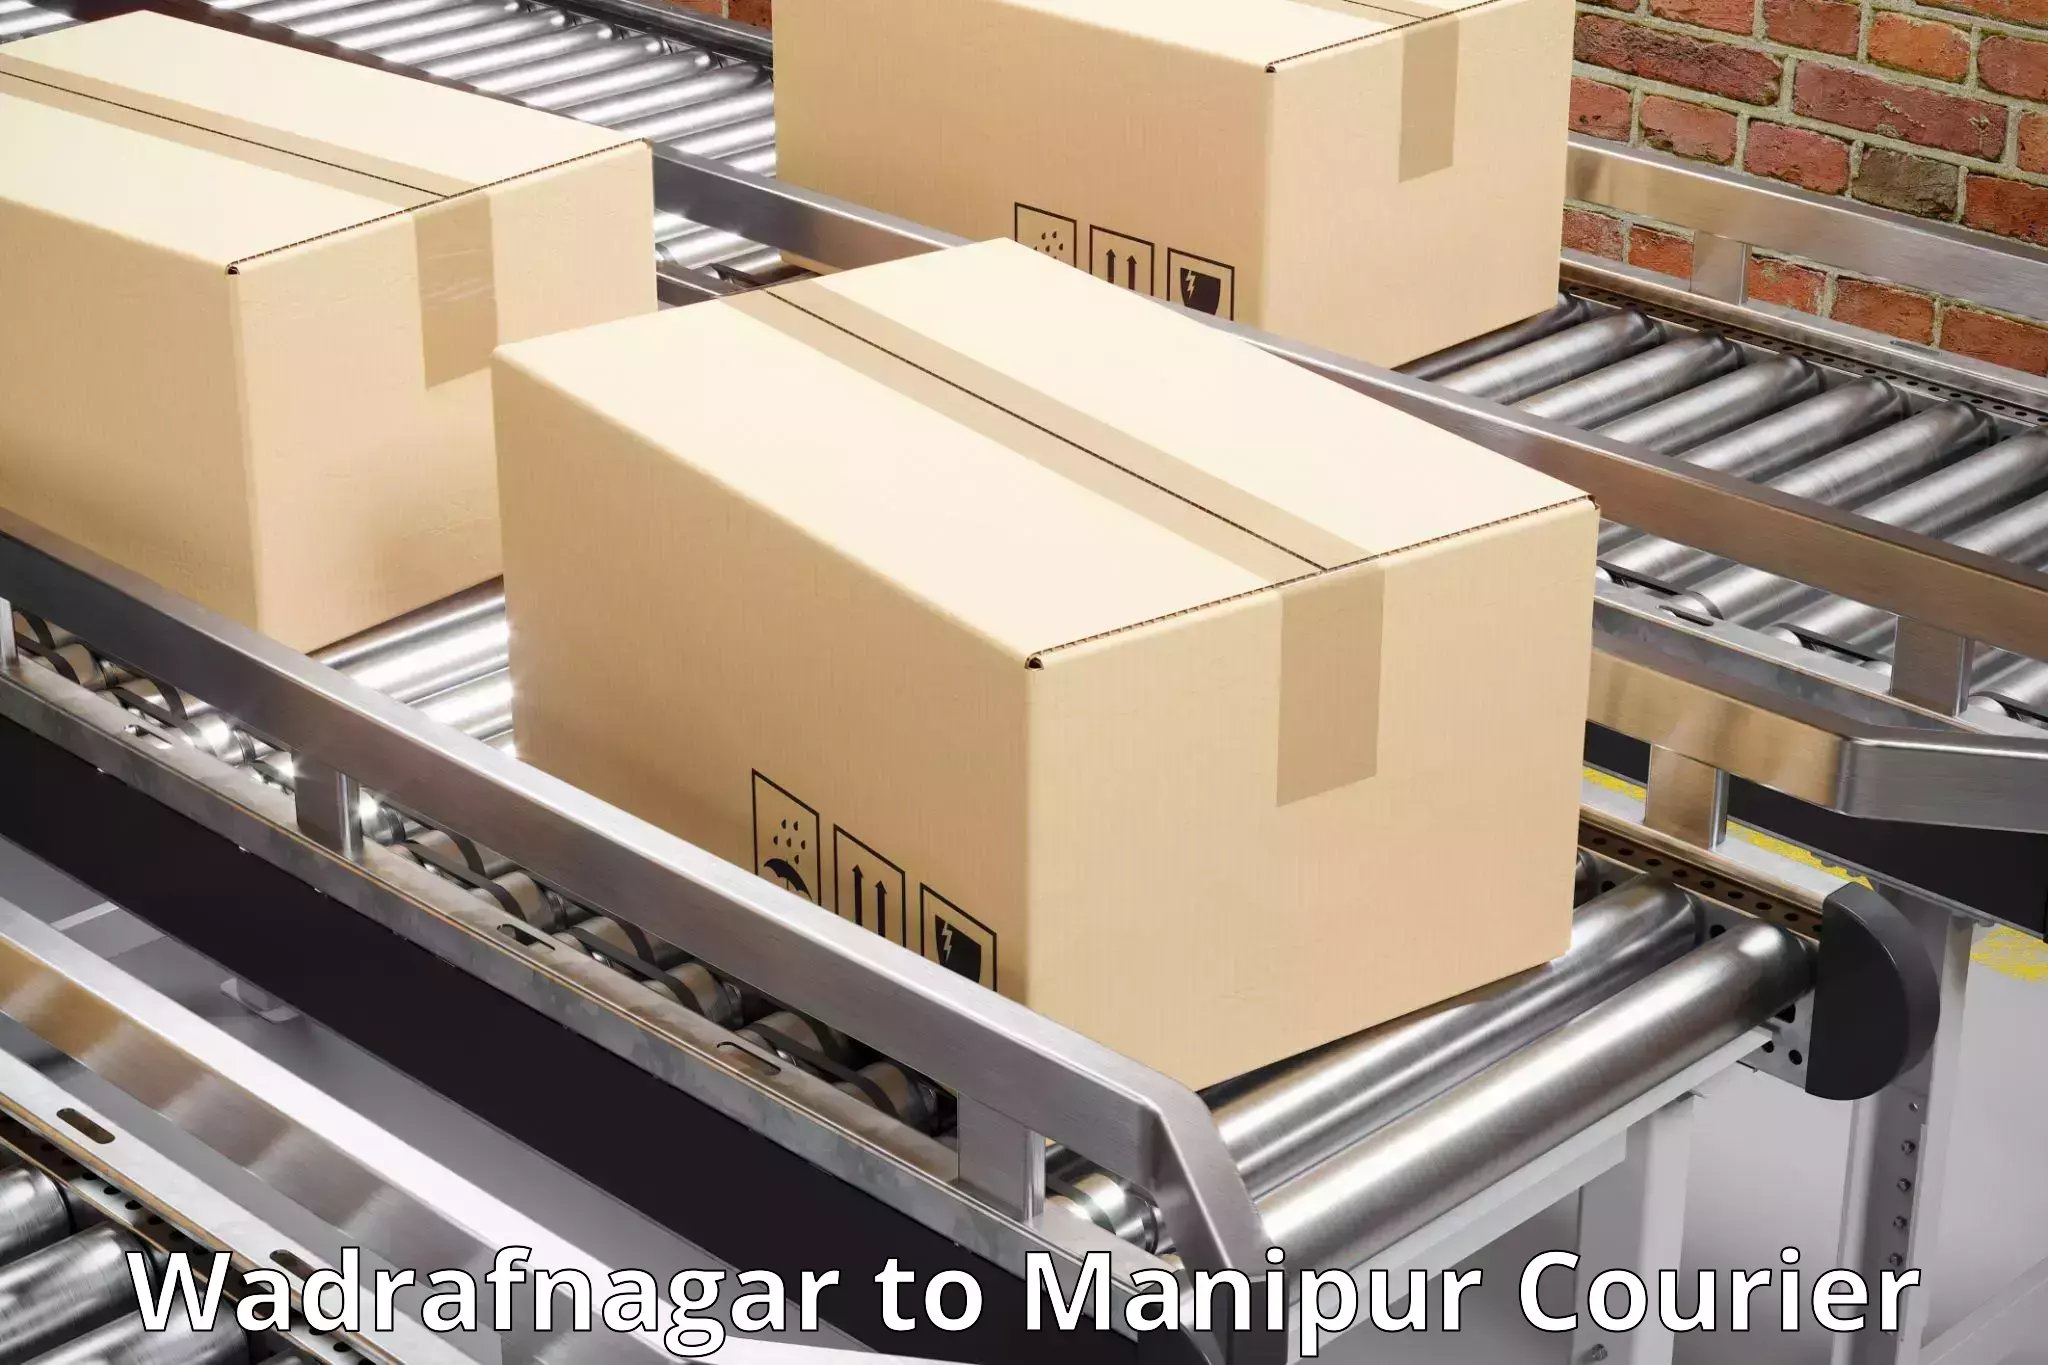 Full-service courier options in Wadrafnagar to Tamenglong